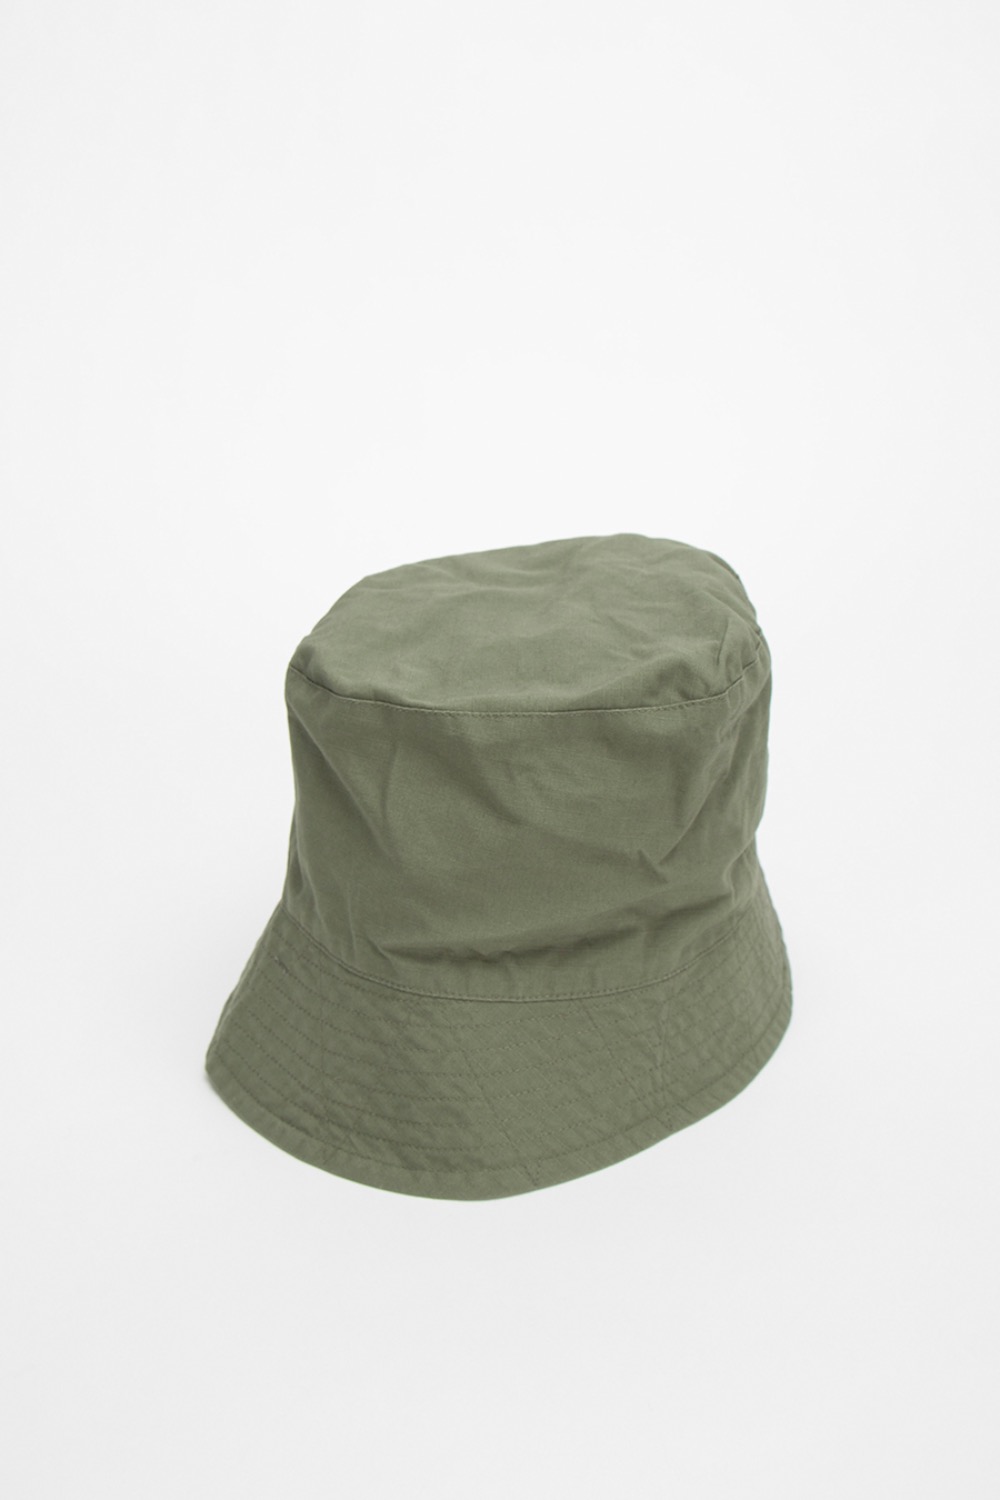 BUCKET HAT OLIVE COTTON RIPSTOP OLIVE